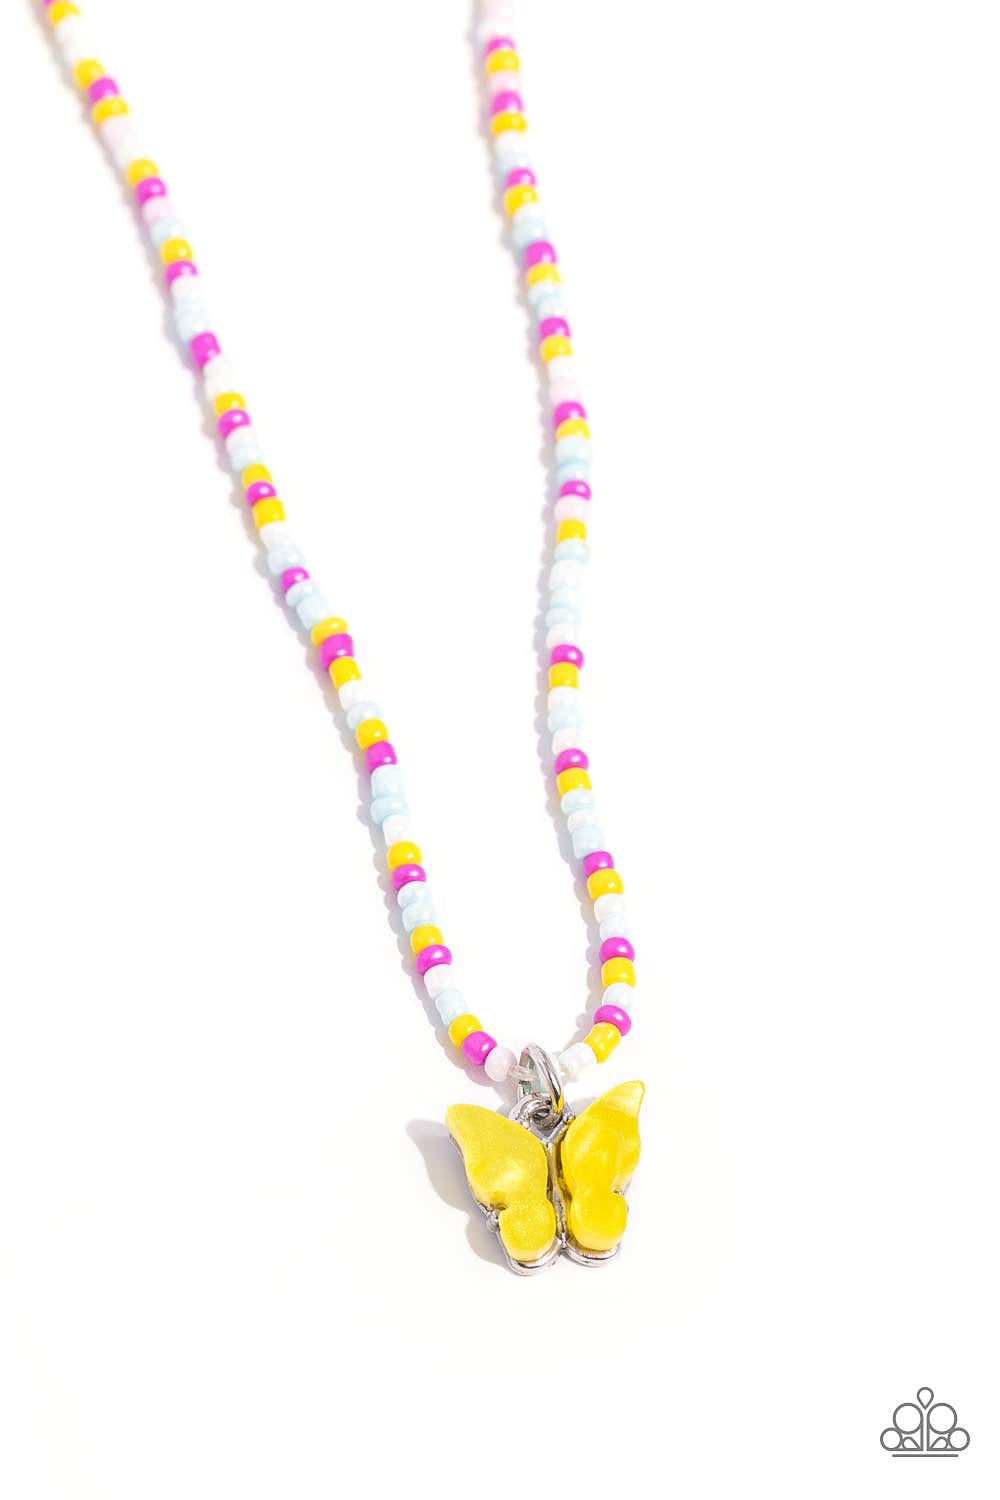 Soaring Shell Necklace (Yellow, White)